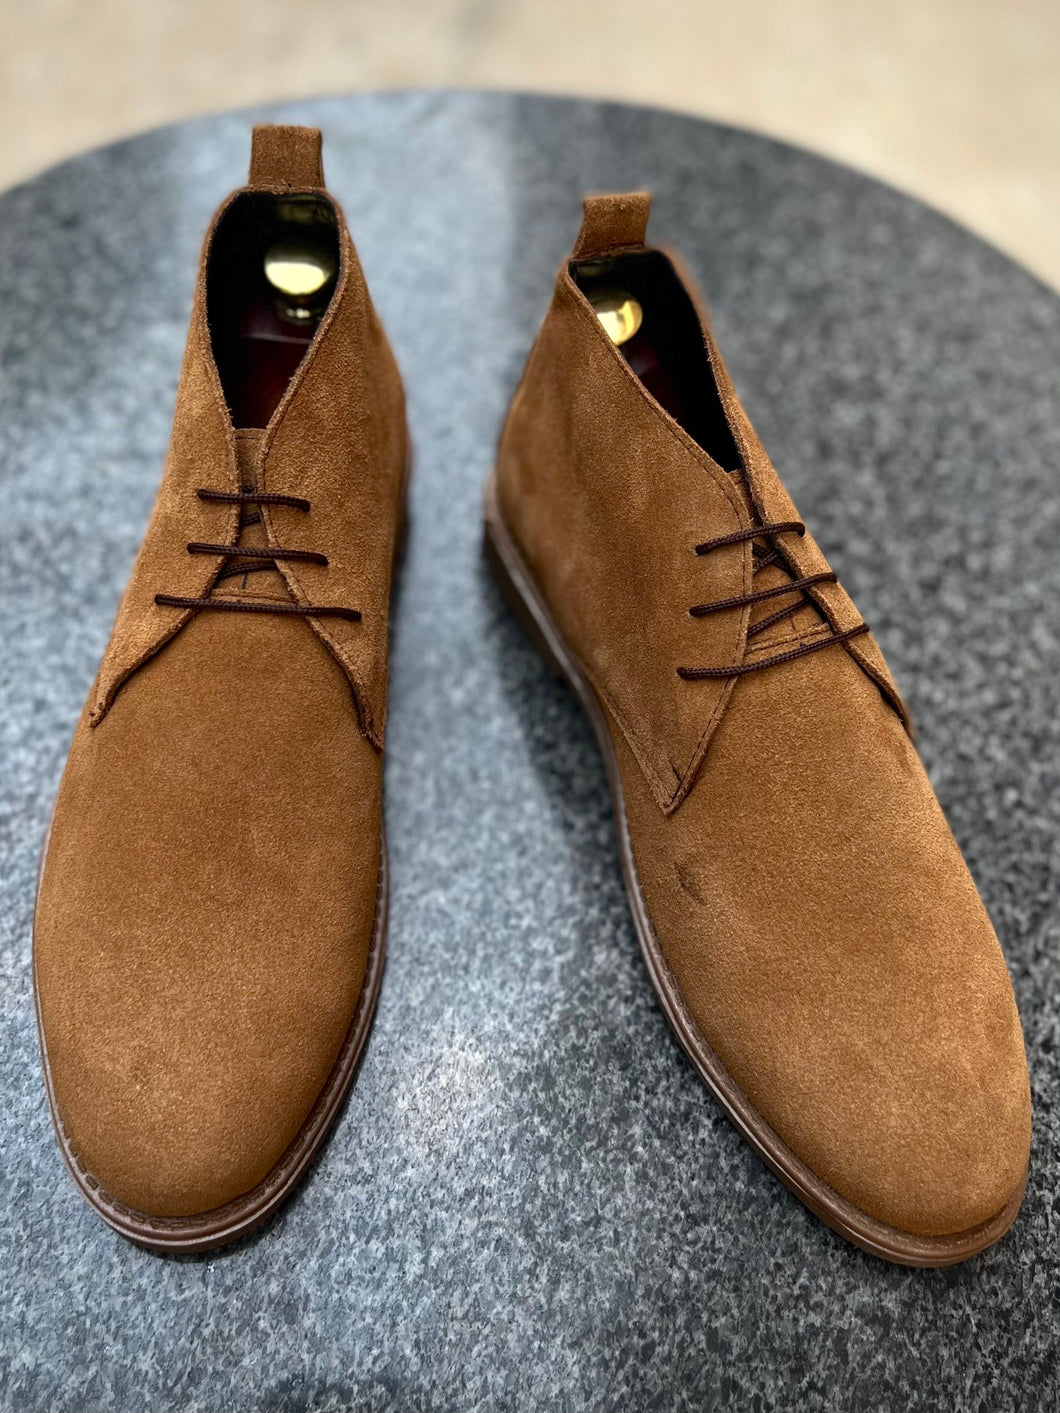 Camel Suede Chukka Boots